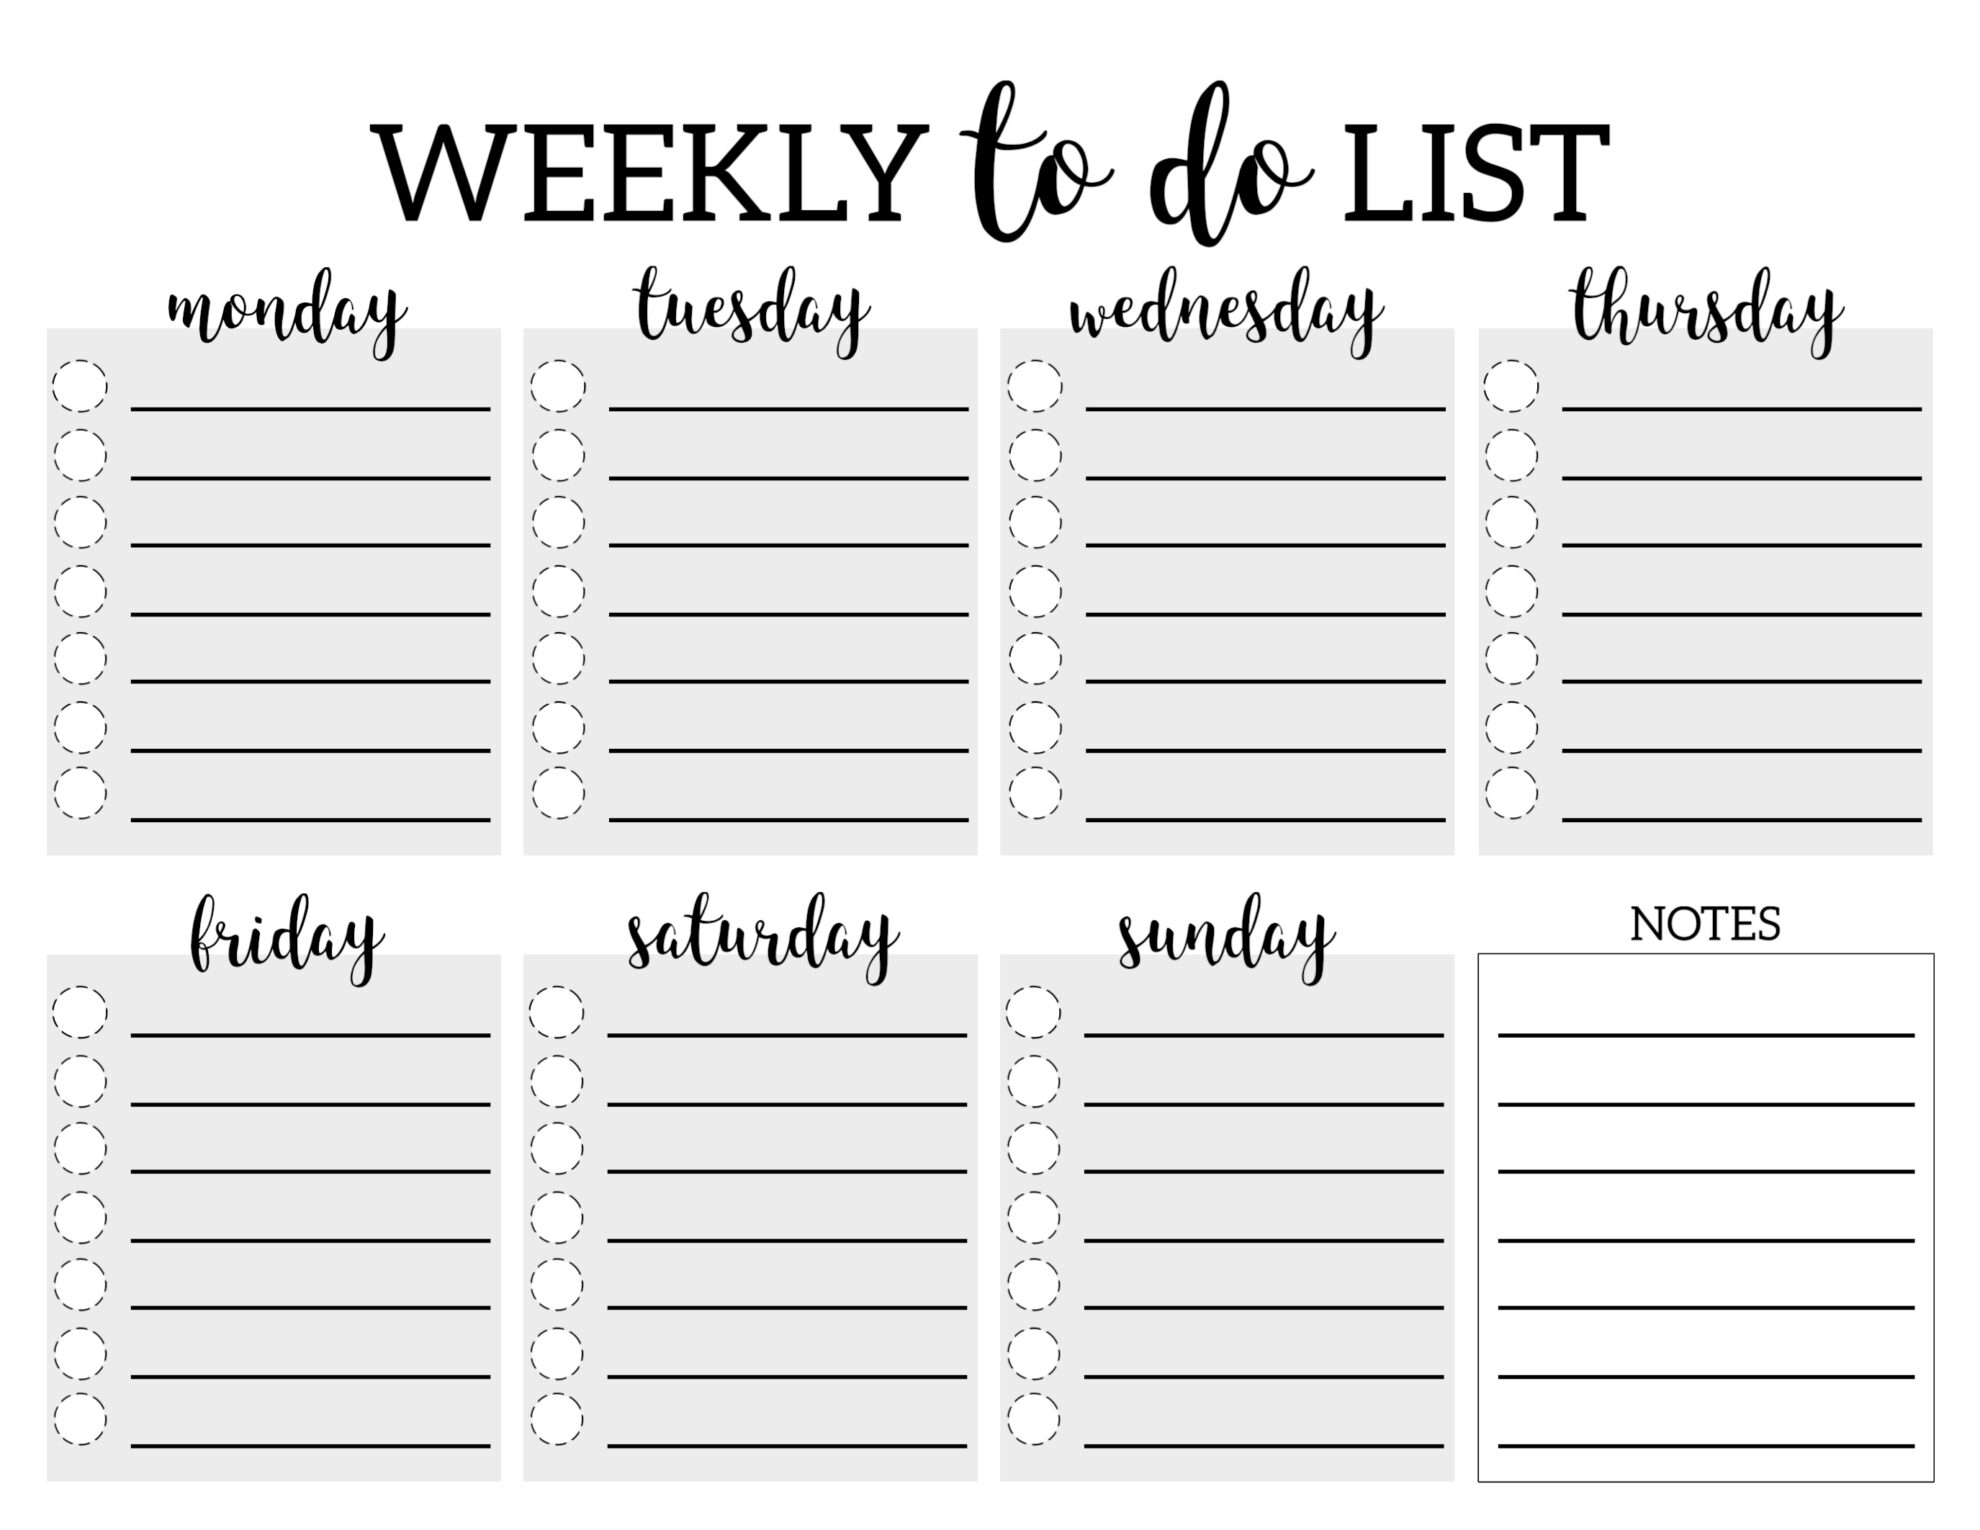 Weekly To Do List Printable Checklist Template - Paper Trail with regard to Monday Through Friday Checklist Free Printable